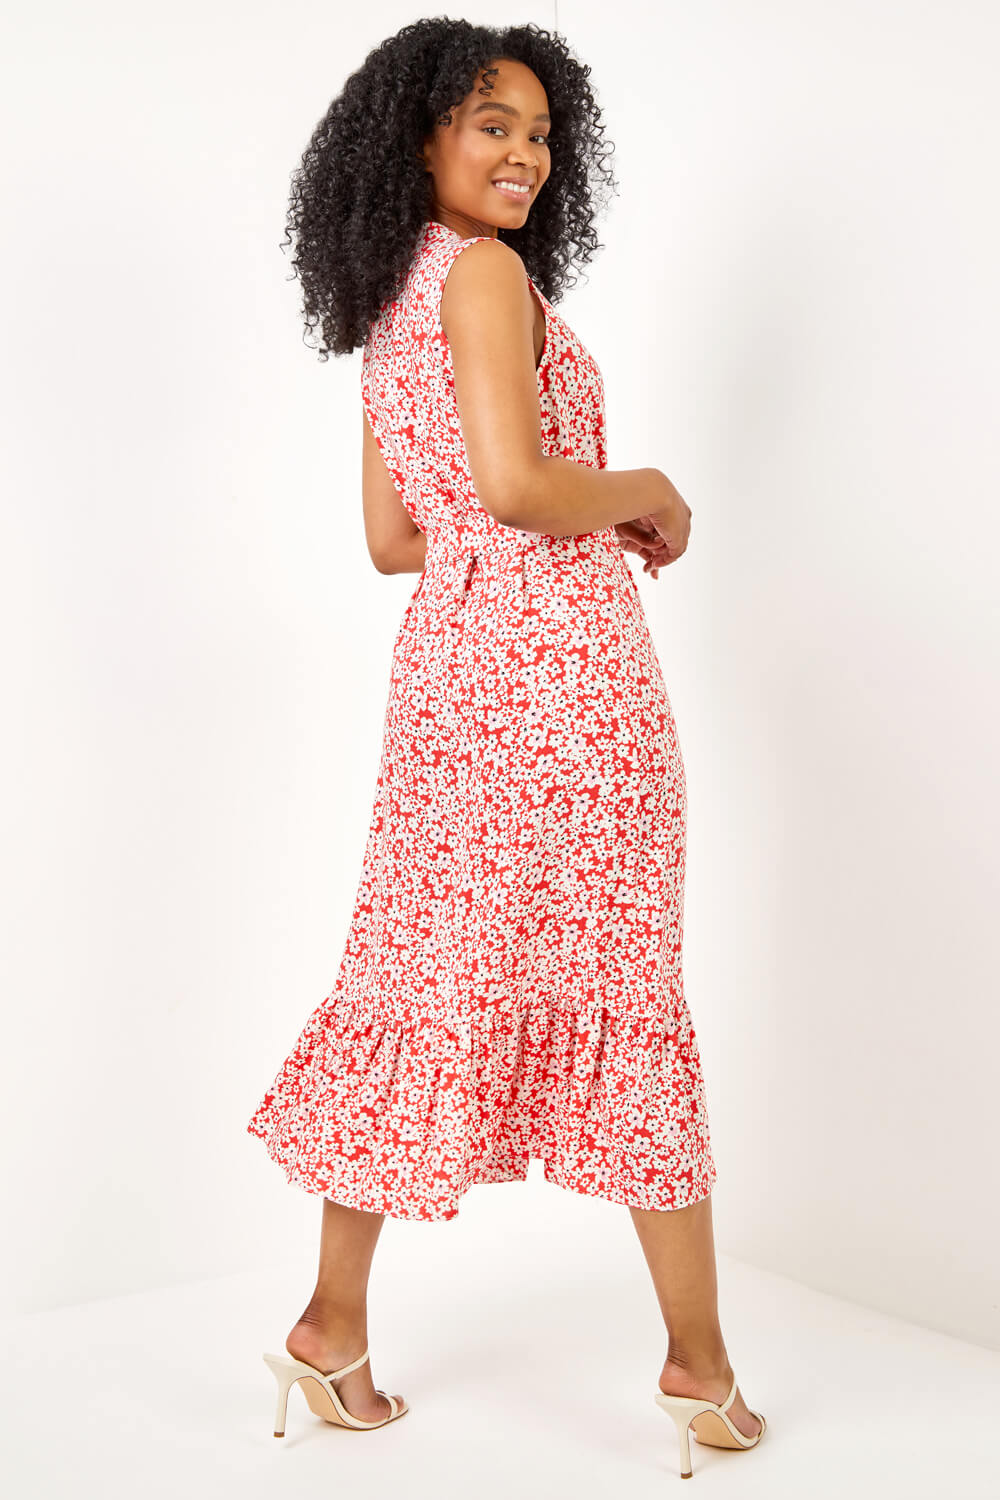 Red Petite Ditsy Floral Print Frill Tiered Dress, Image 3 of 5